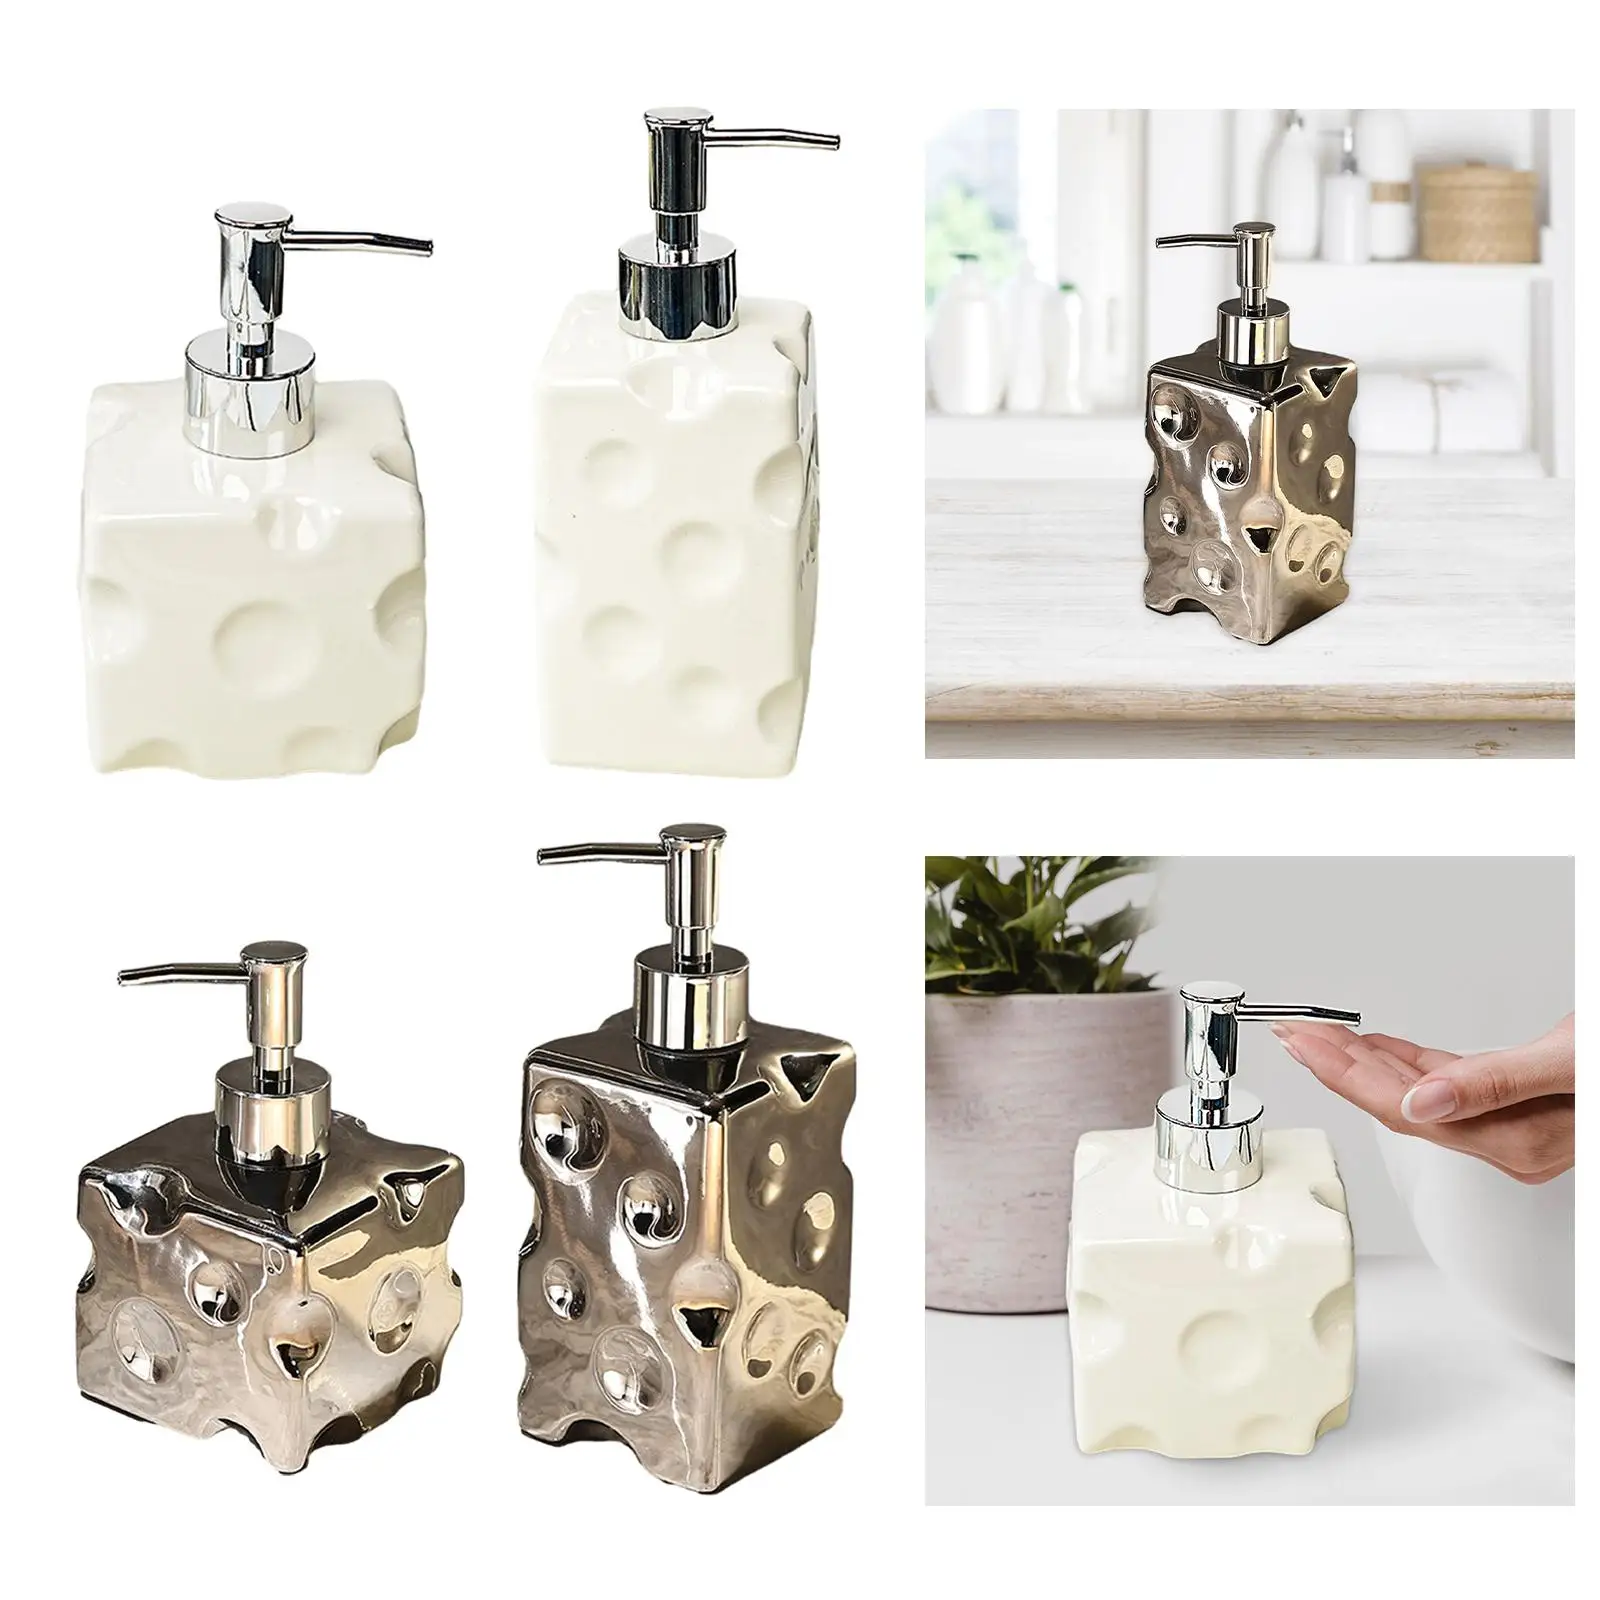 Ceramic Soap Dispenser Easy to Fill Leakproof Pump Soap Container Refillable for Farmhouse Washroom Kitchen Countertop Vanity